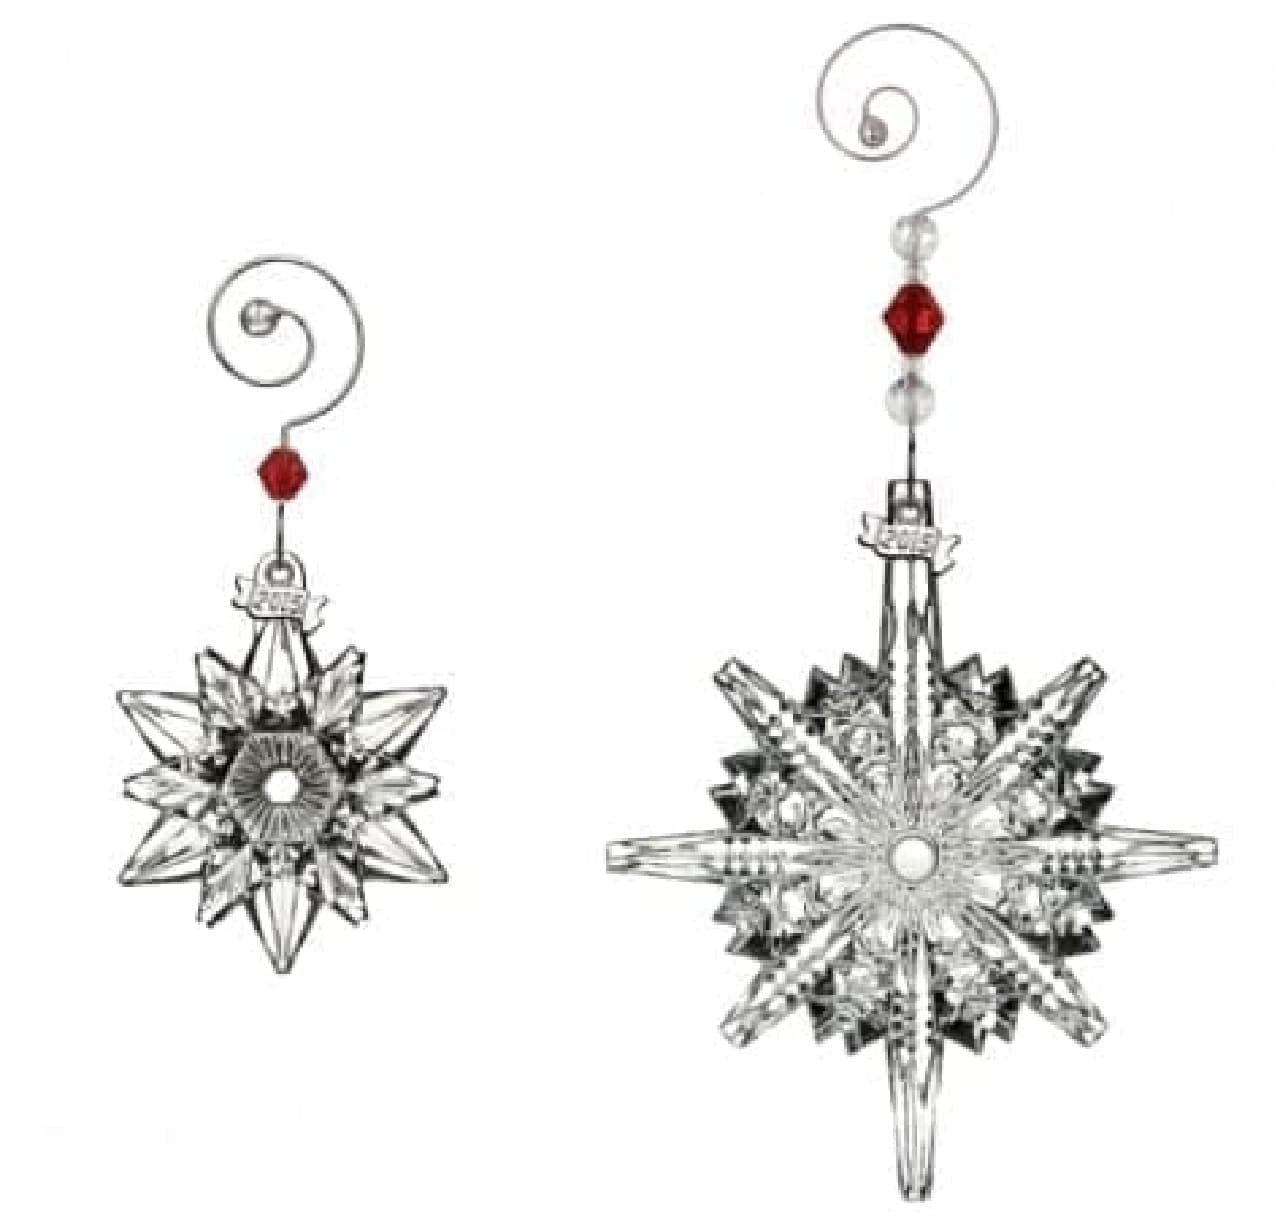 (Left) Mini Snowflake 5,000 yen, (Right) Snow Star 8,000 yen Recommended for interior accents